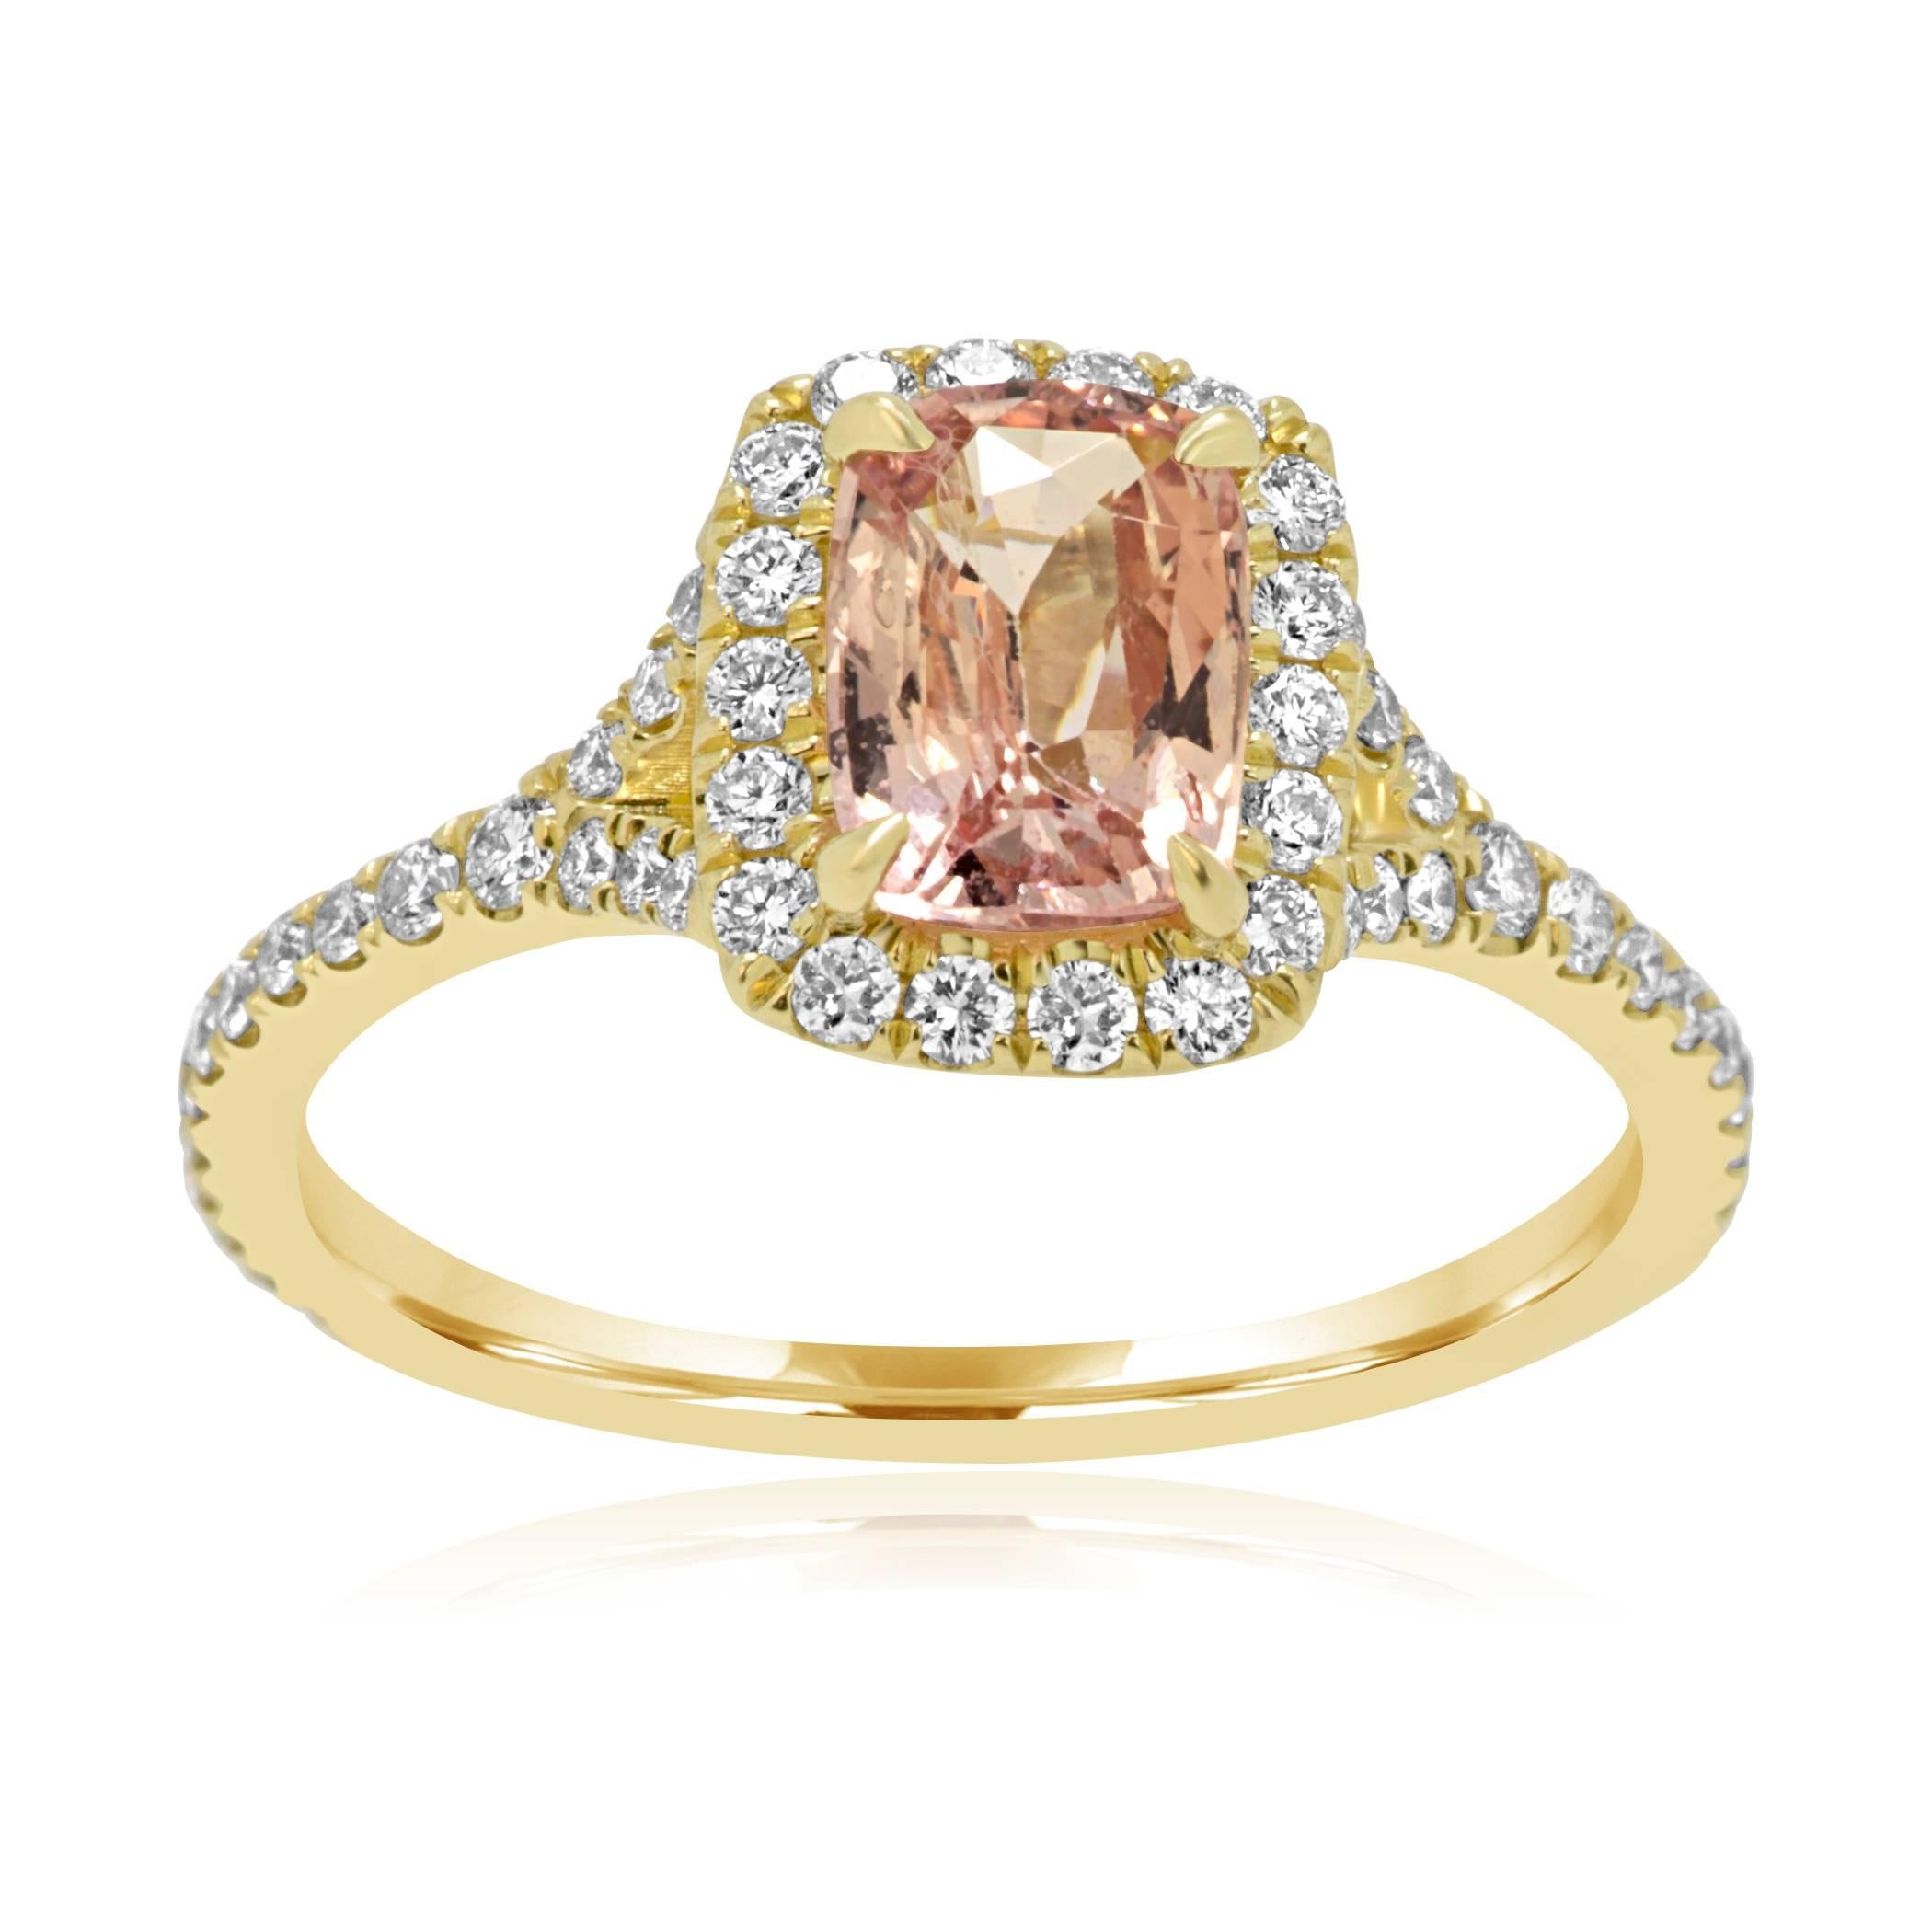 Very Rare Padparadscha Sapphire Cushion 1.27 Carat encircled in a single Halo of White Round Diamonds 0.57 Carat in 18K Yellow Gold Ring.

Style available in different price ranges. Prices are based on your selection of 4C's Cut, Color, Carat,